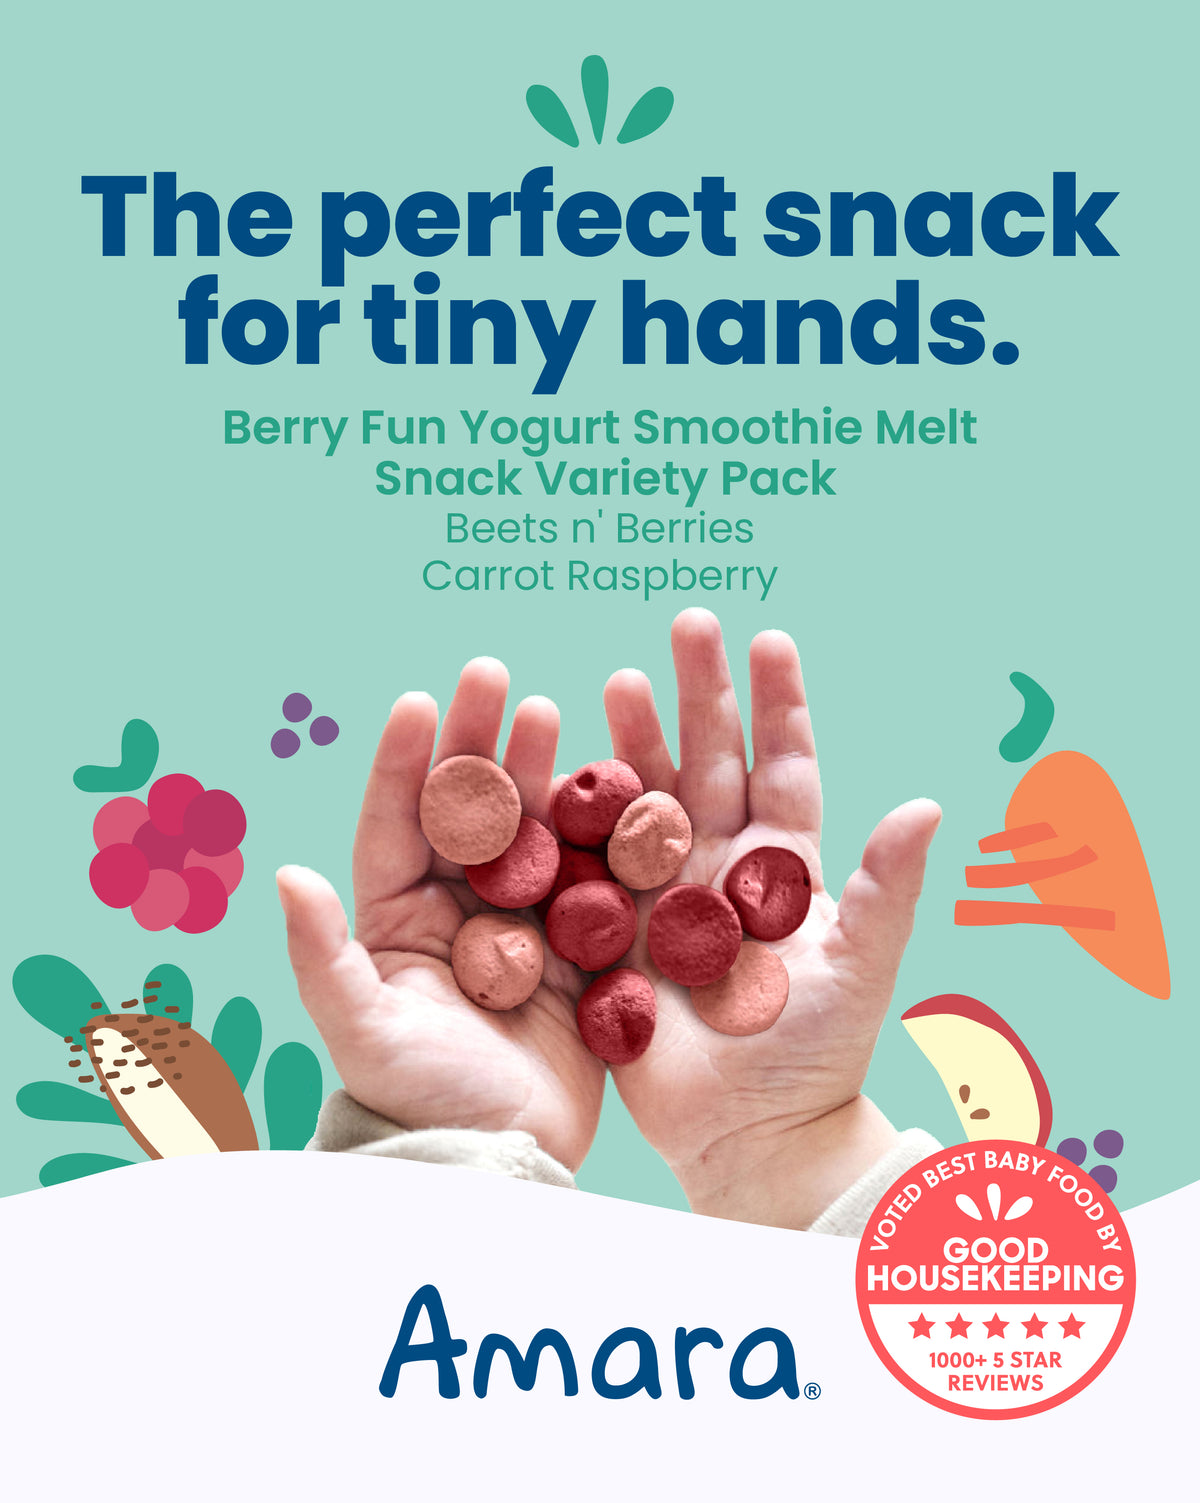 Berry Fun Smoothie Melt Snack Variety Pack